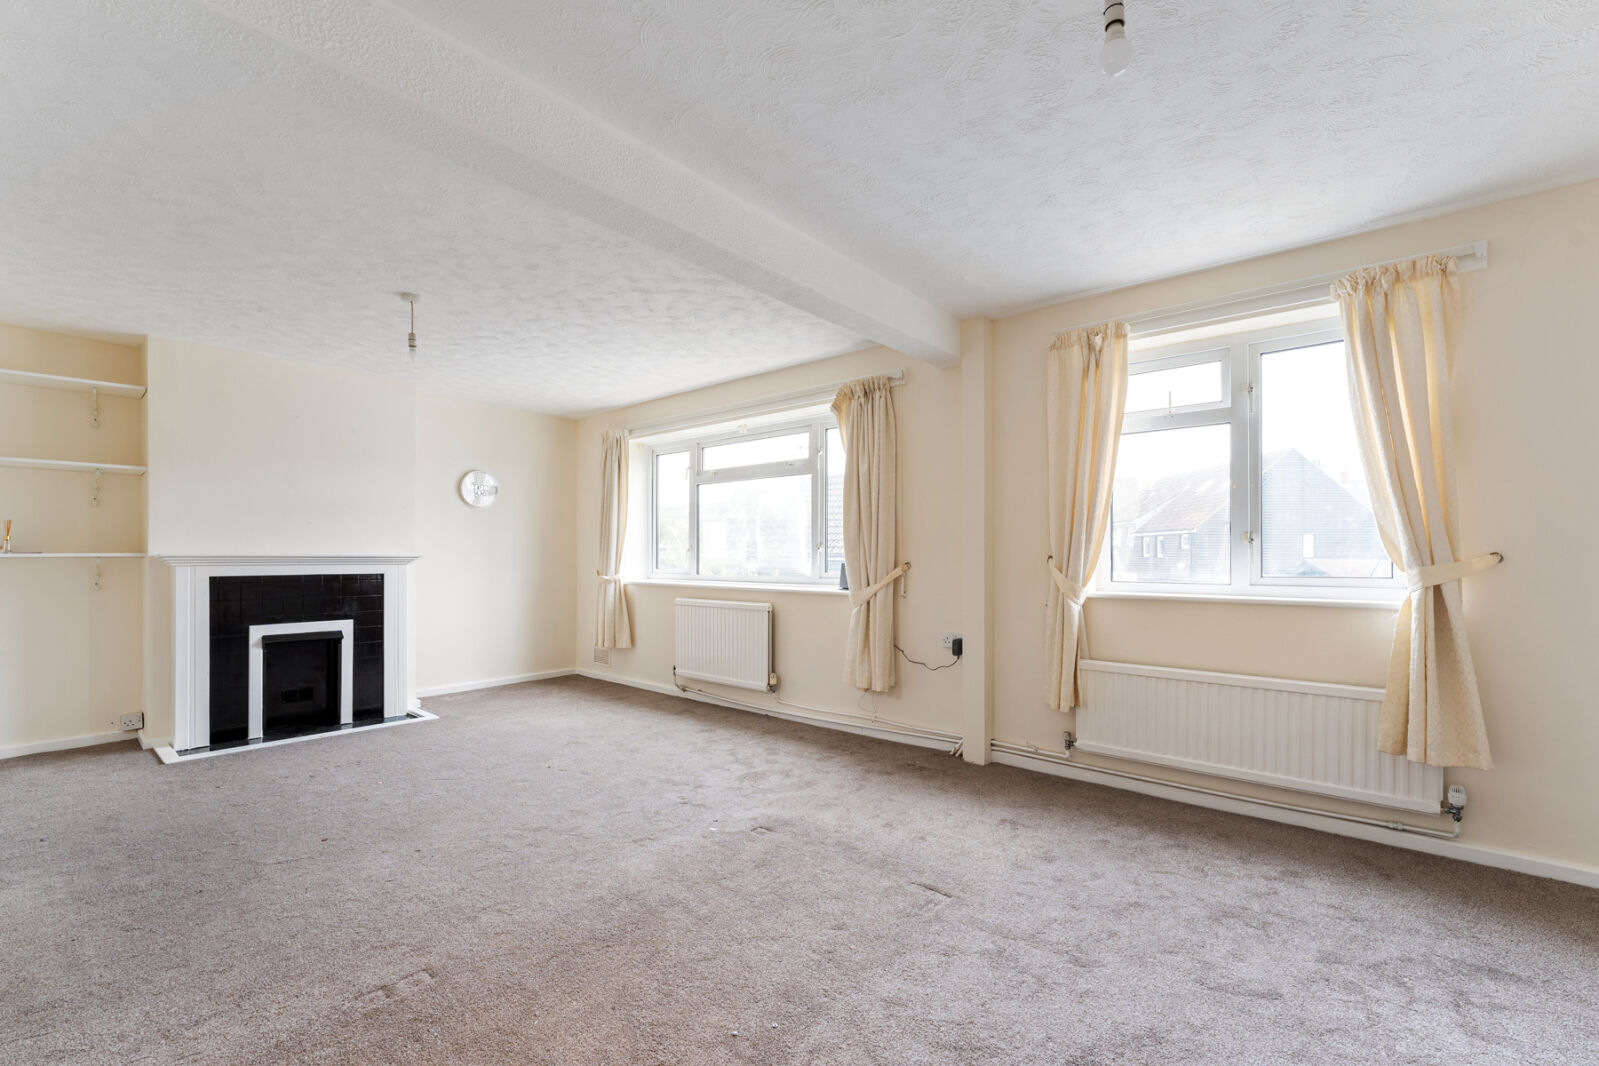 4 bedroom  flat for sale Manor Road, Stansted, CM24, main image